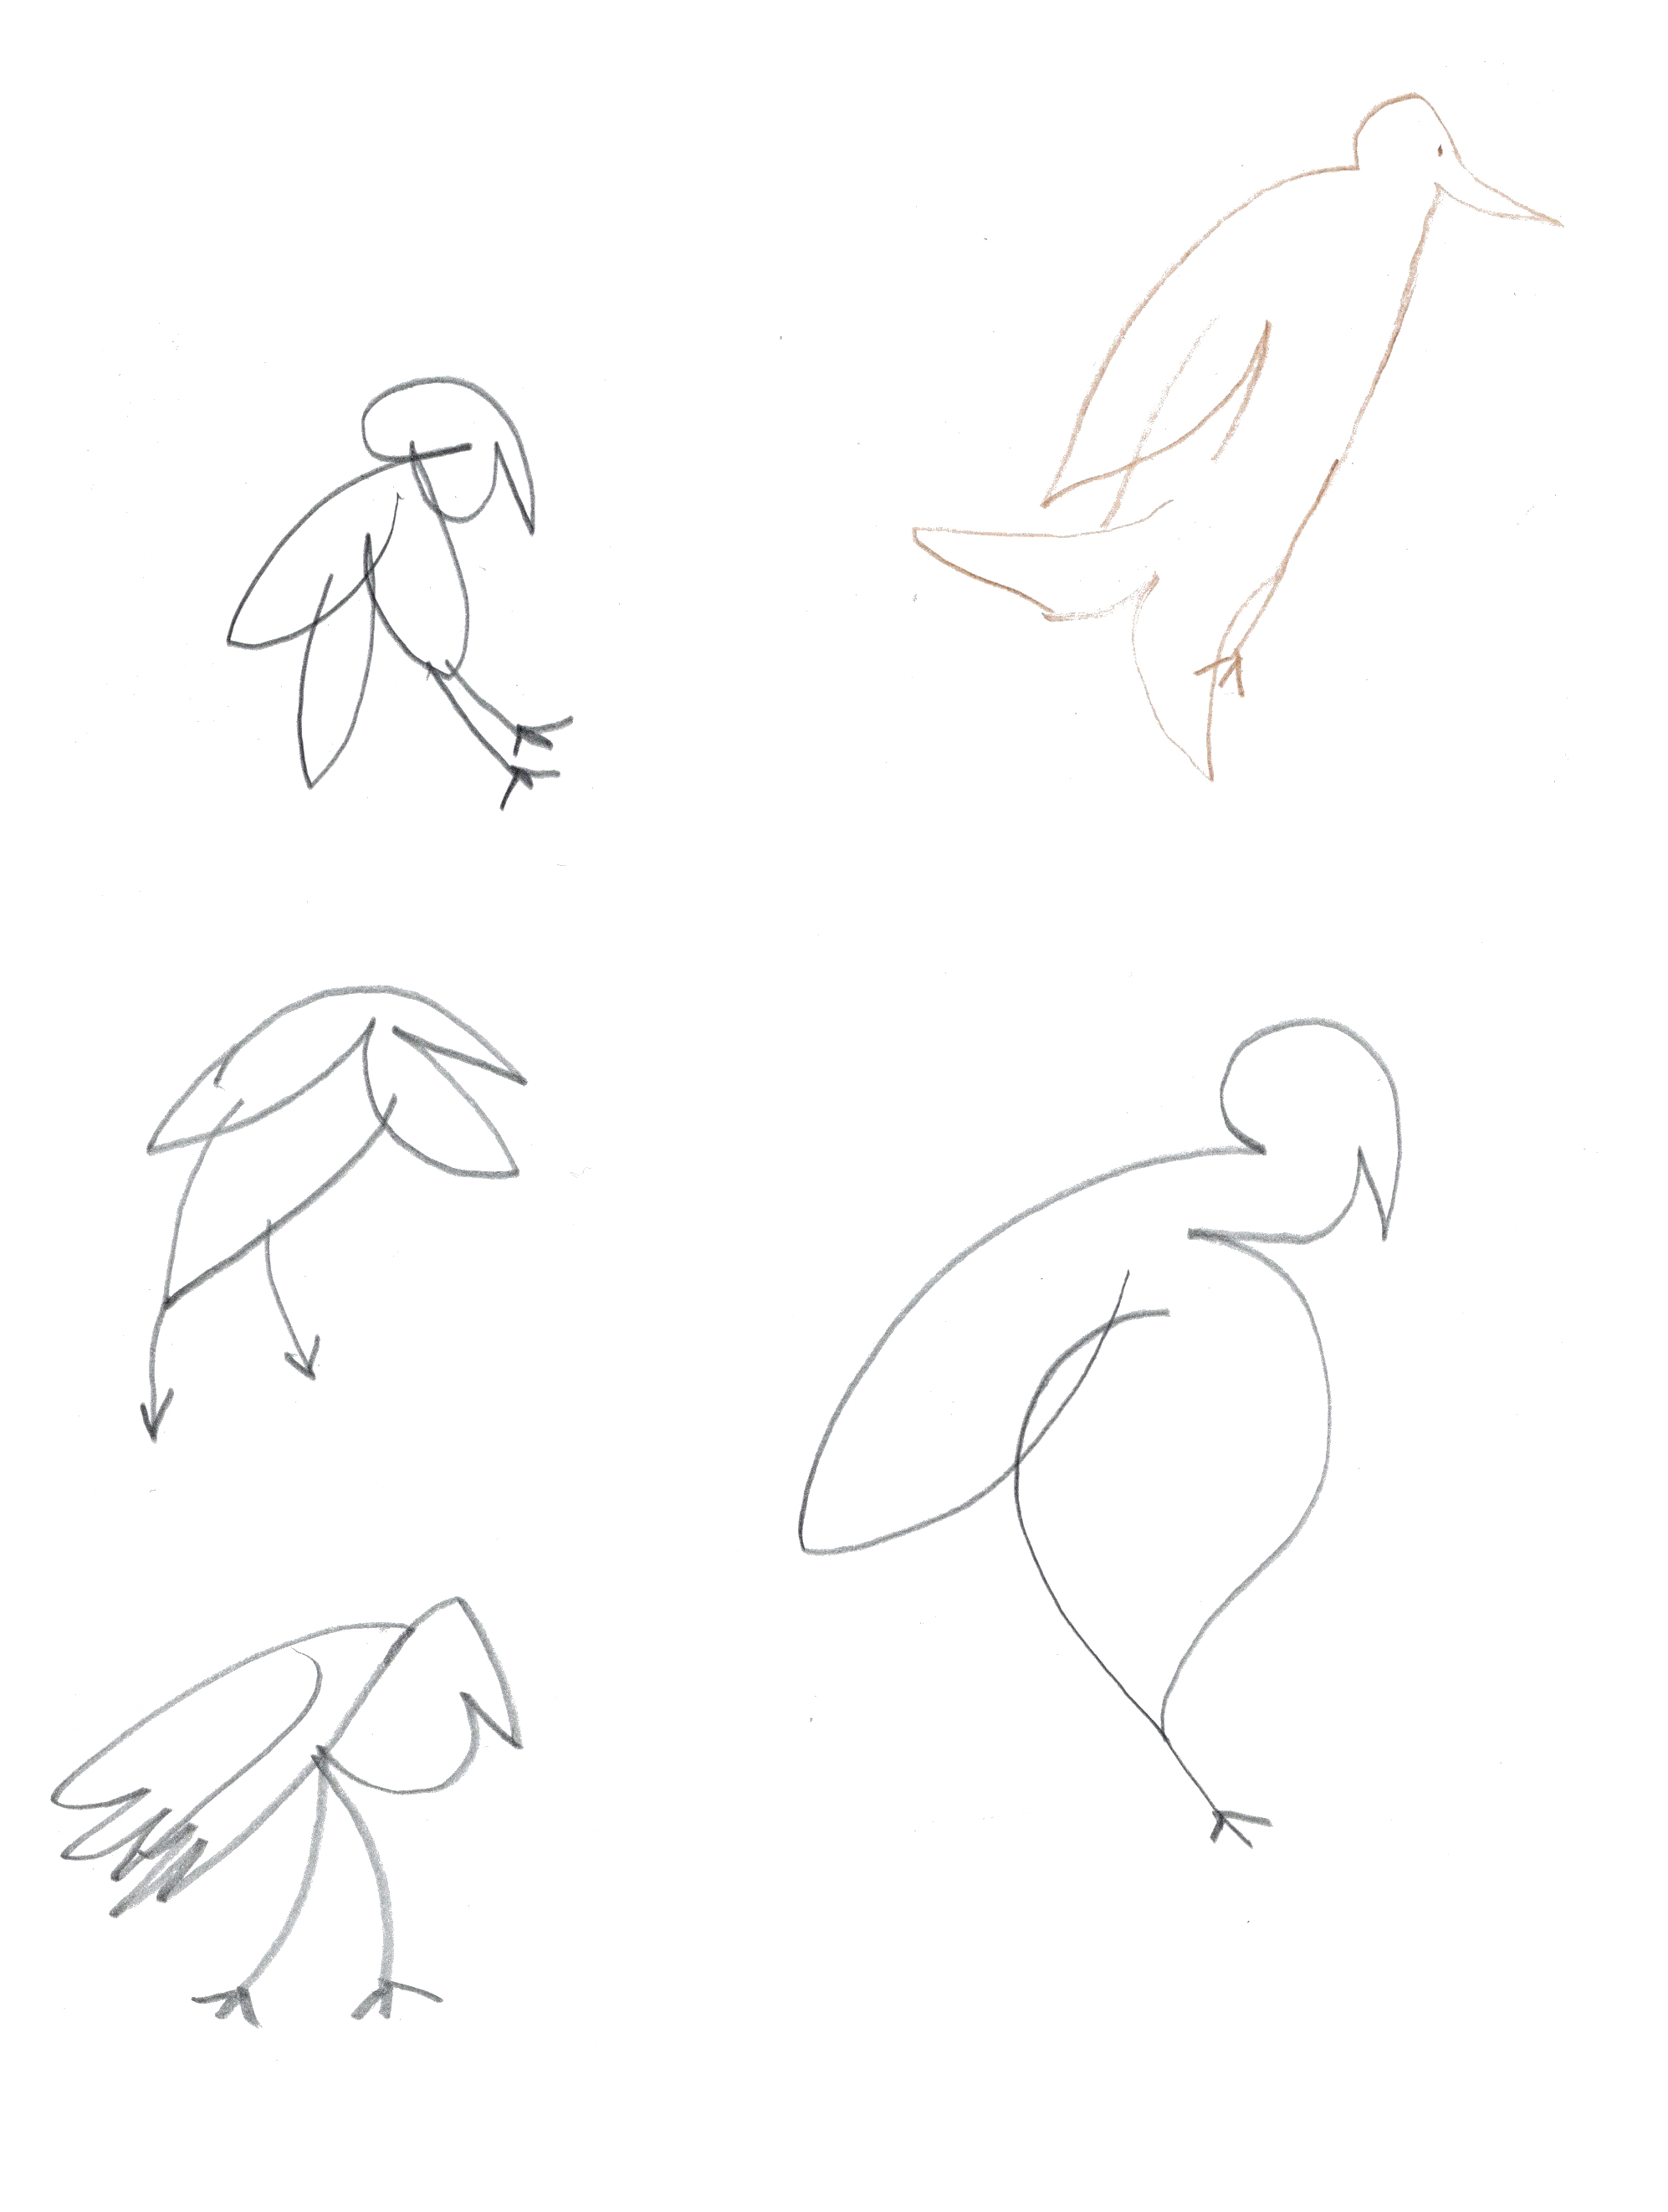 pencil drawings of five birds drawn with simple lines